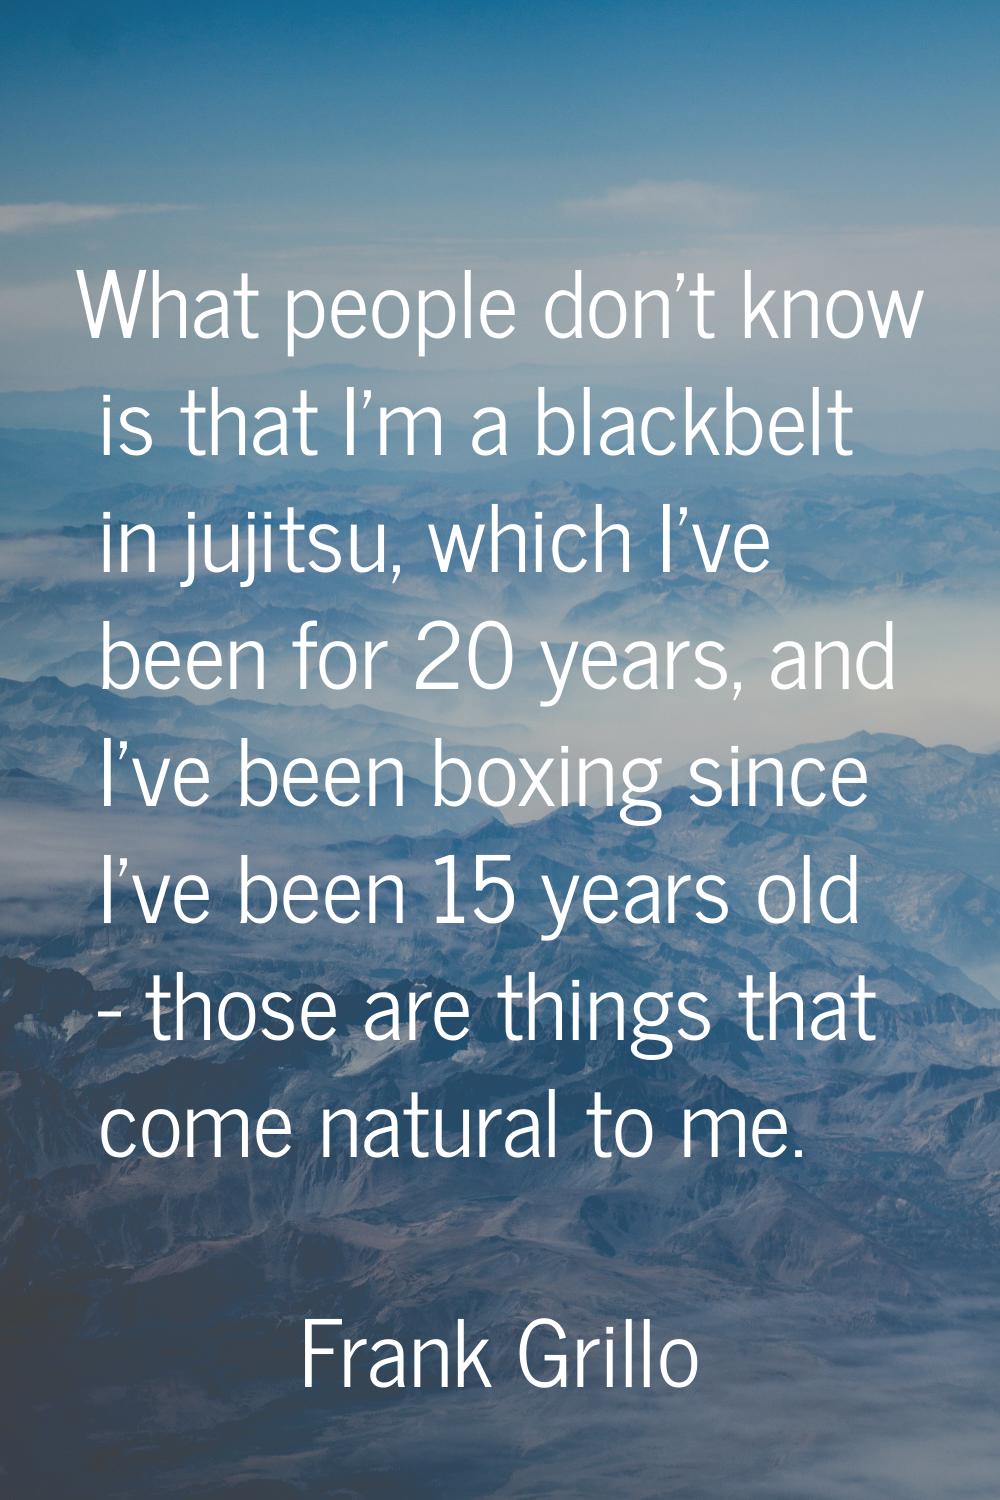 What people don't know is that I'm a blackbelt in jujitsu, which I've been for 20 years, and I've b